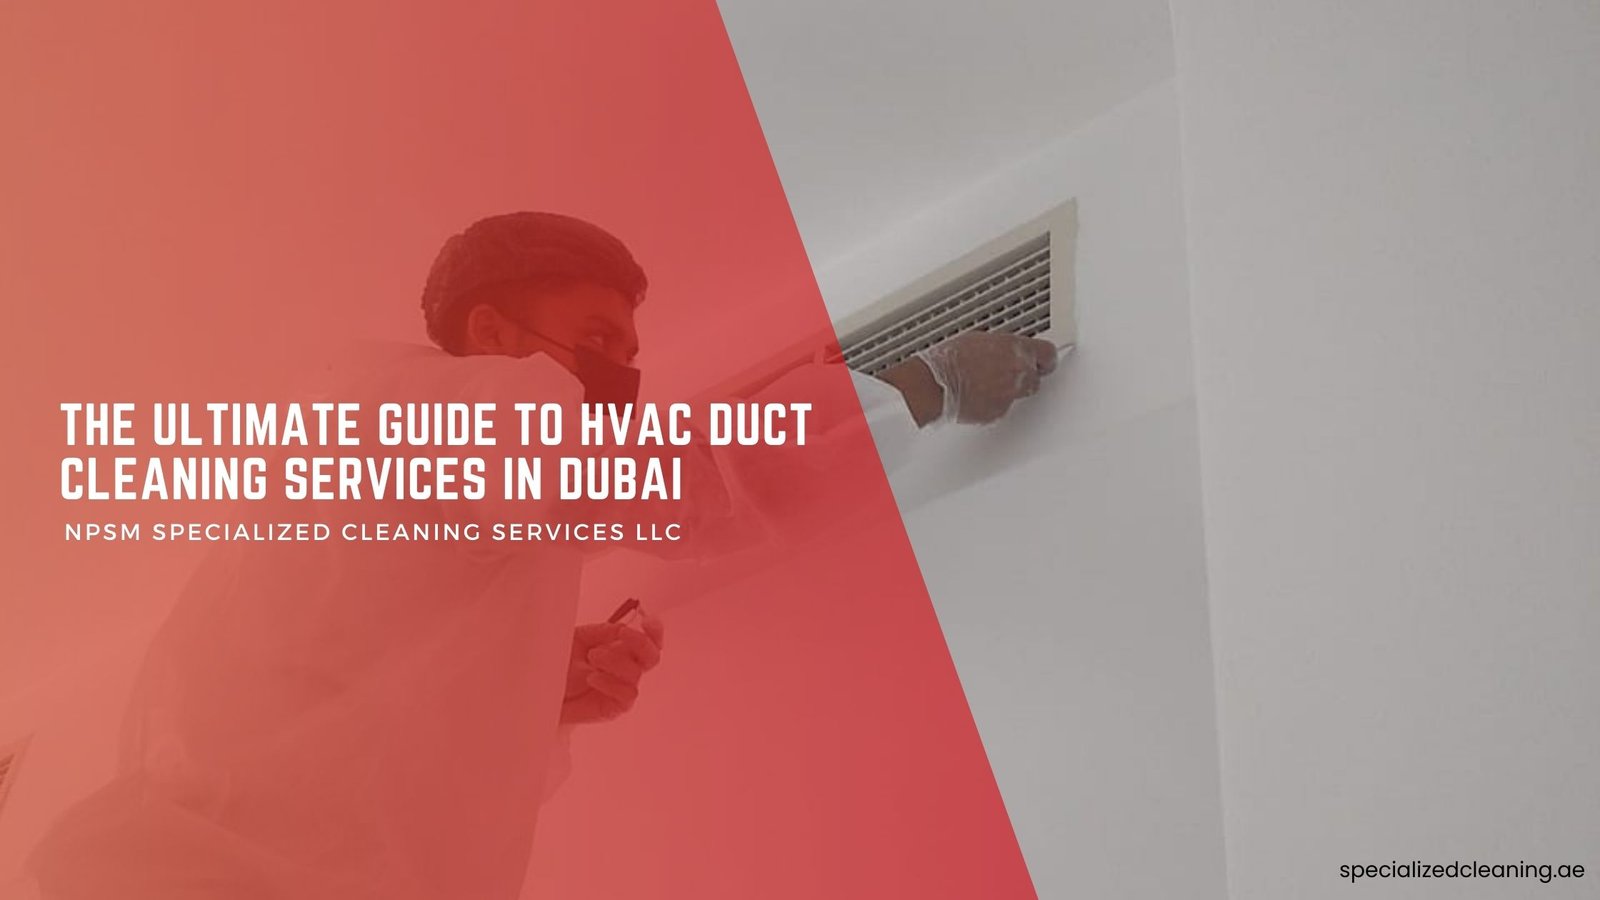 The Ultimate Guide to HVAC Duct Cleaning Services in Dubai